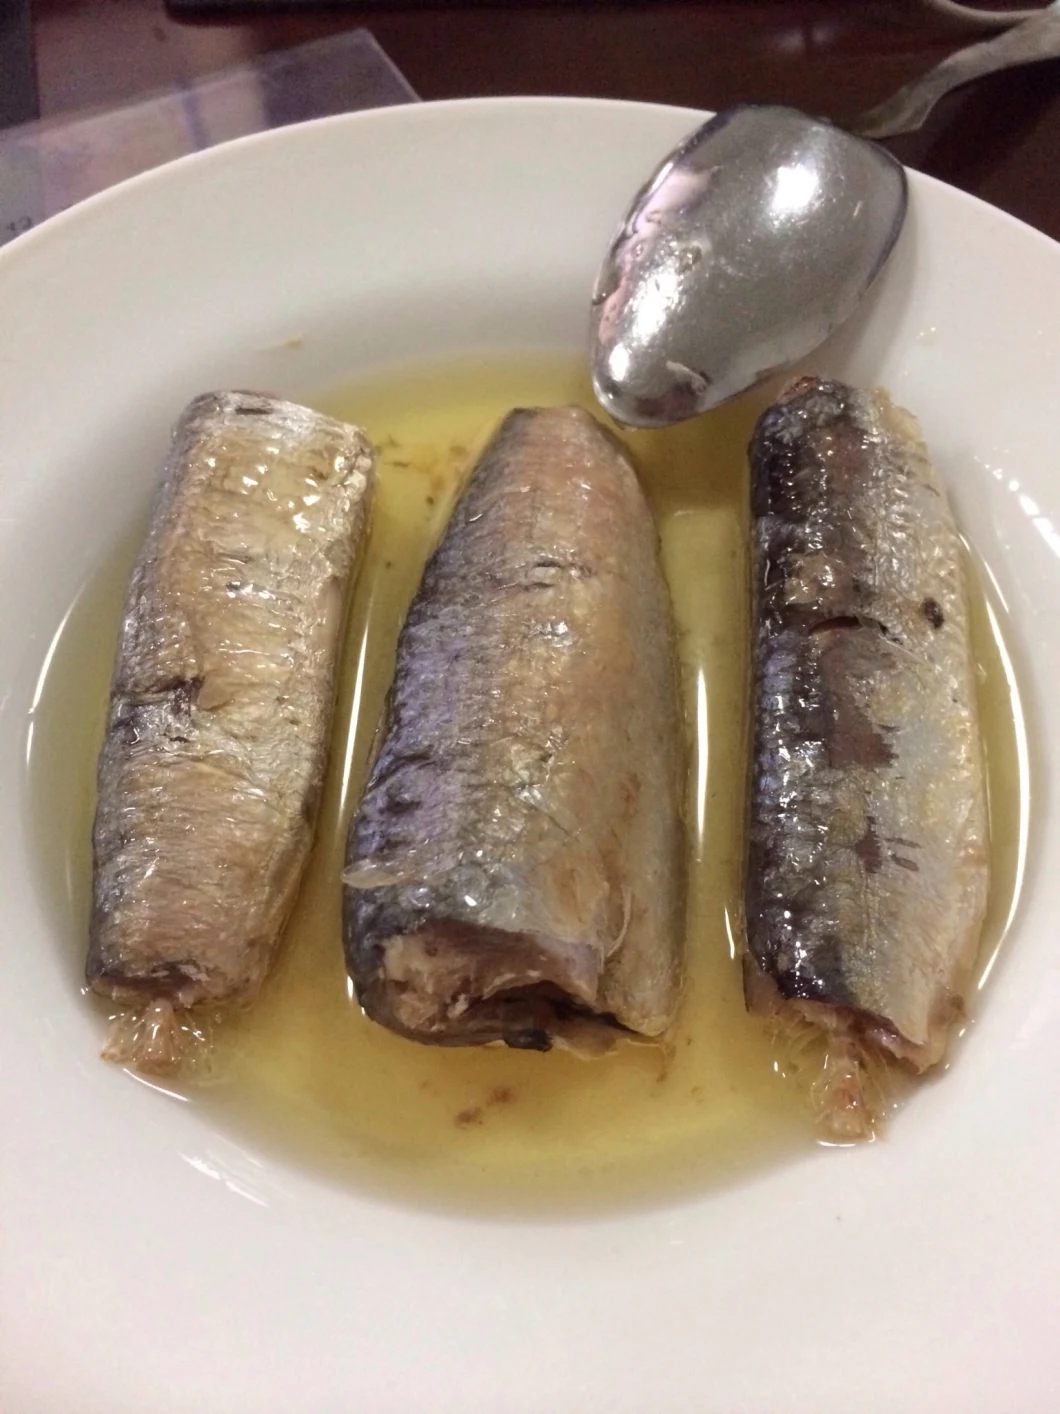 155g Canned Sardines in Oil